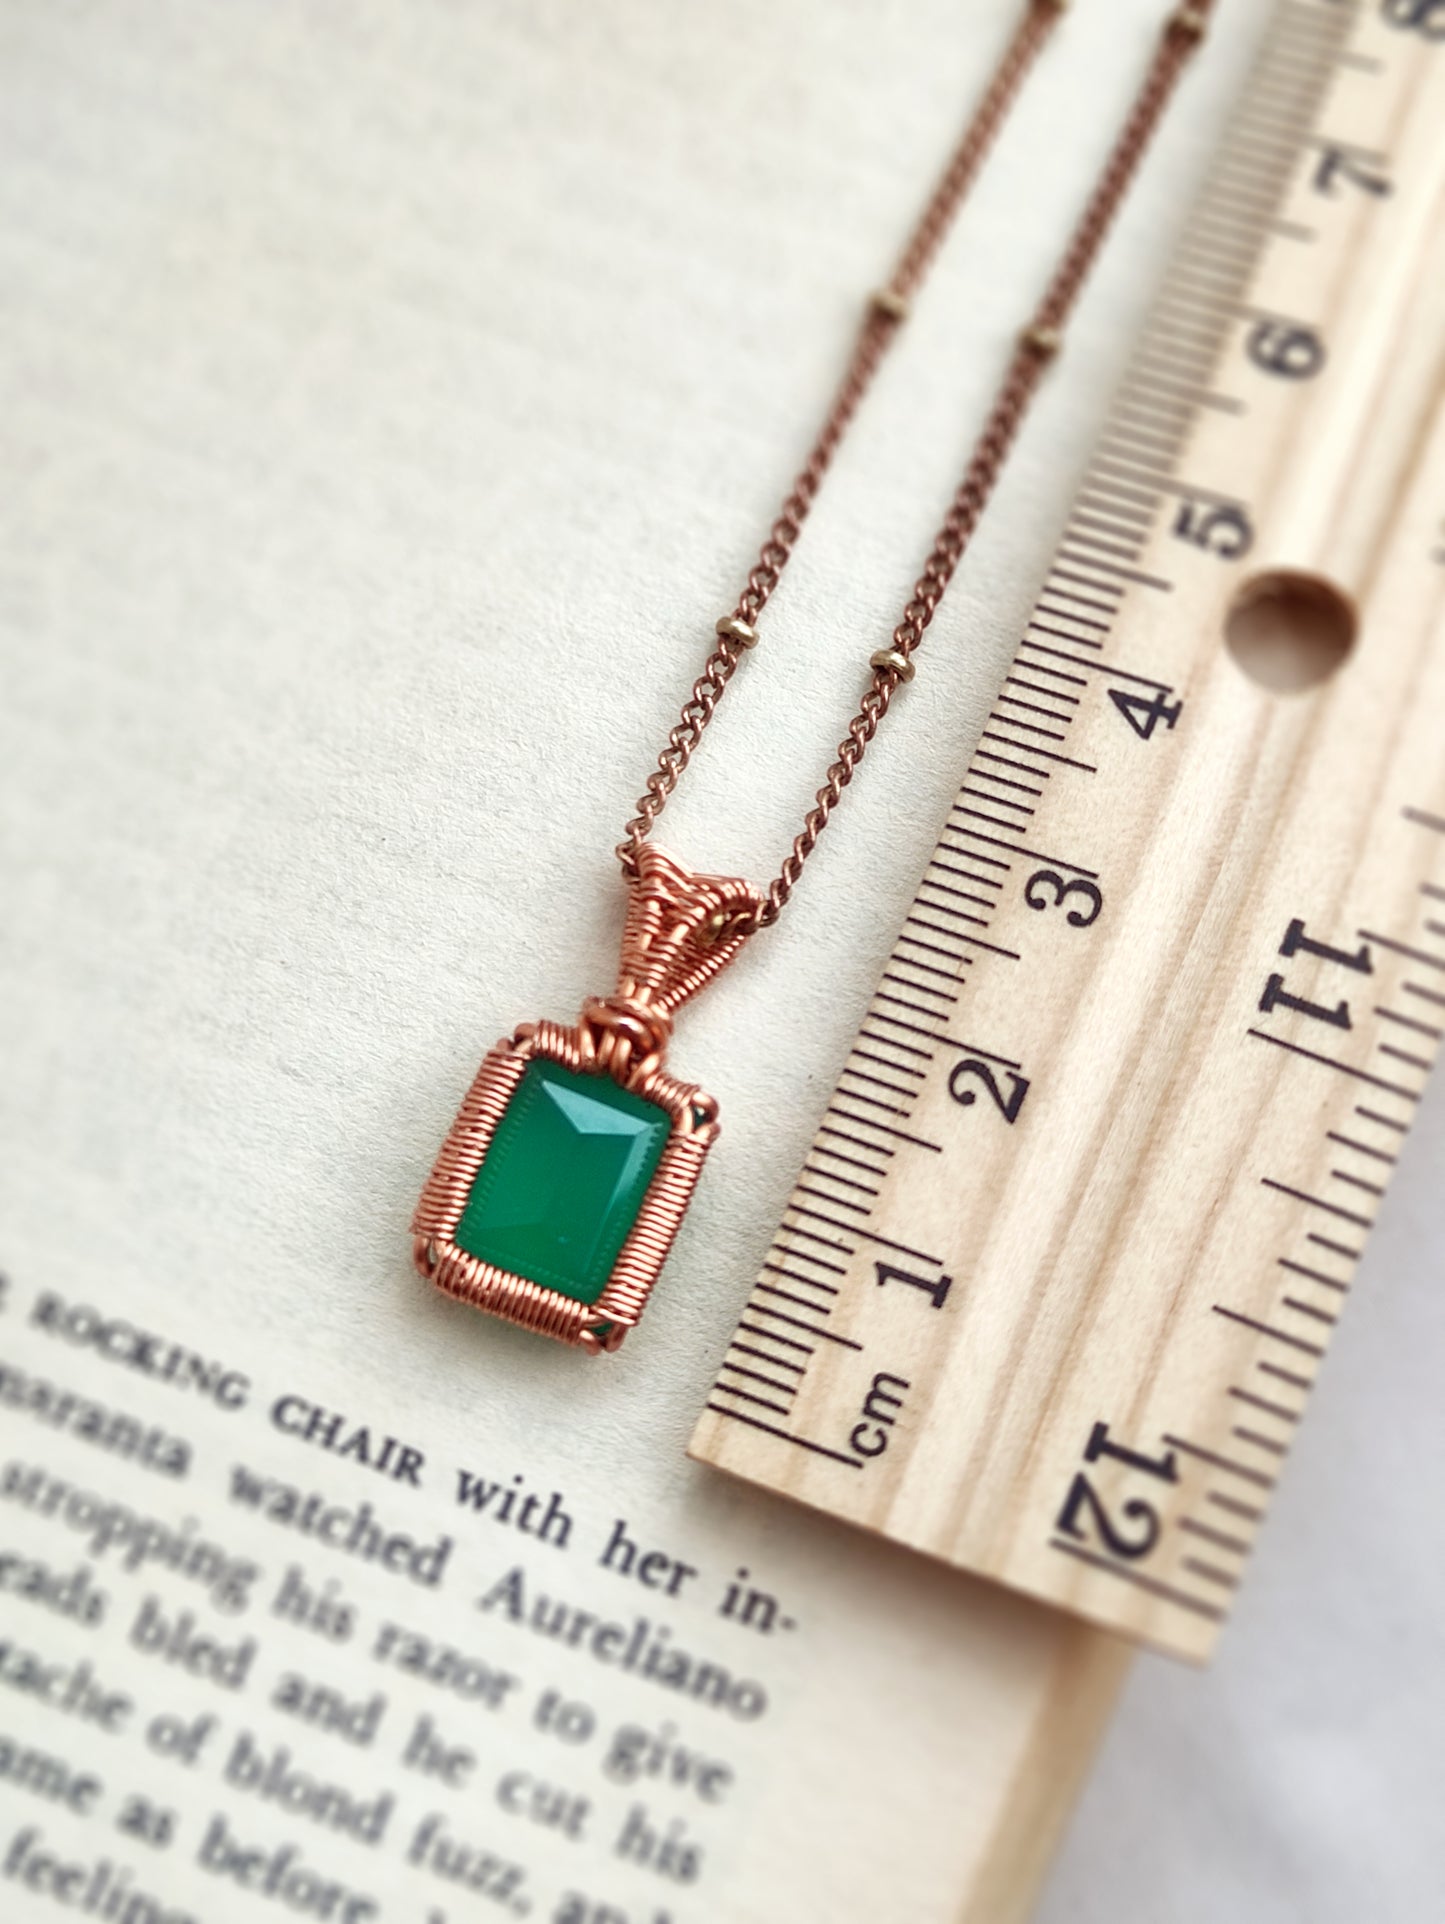 Green Onyx Baguette Cut Pendant Necklace in Solid Copper